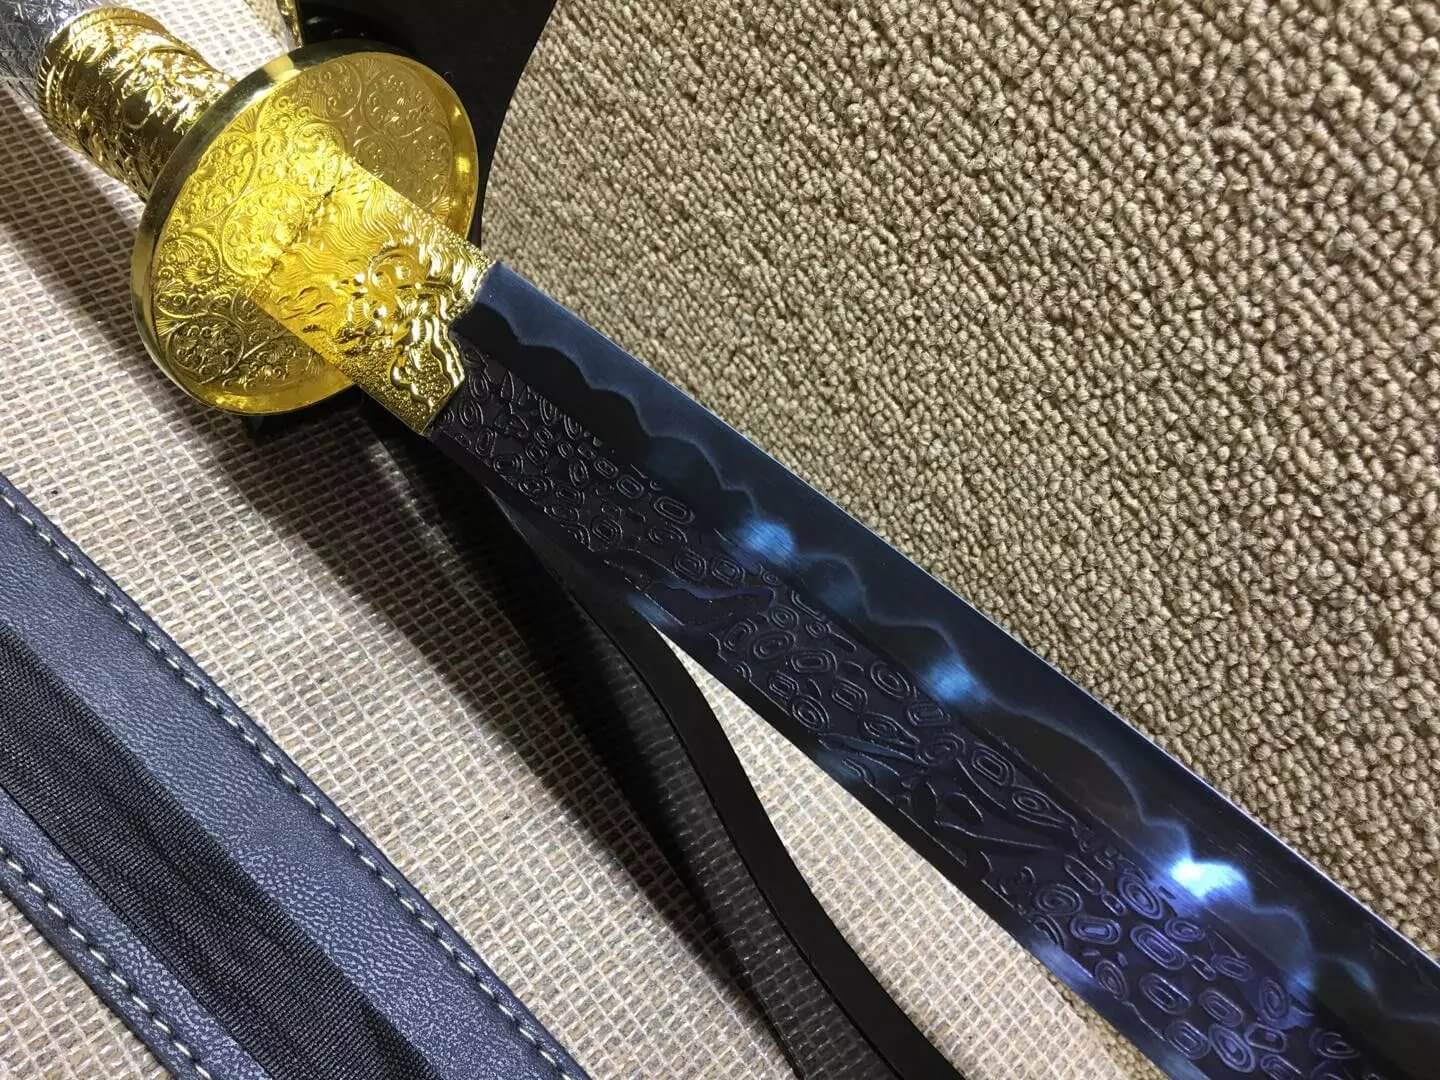 Kangxi baodao,High carbon steel blue blade,Alloy fitting - Chinese sword shop